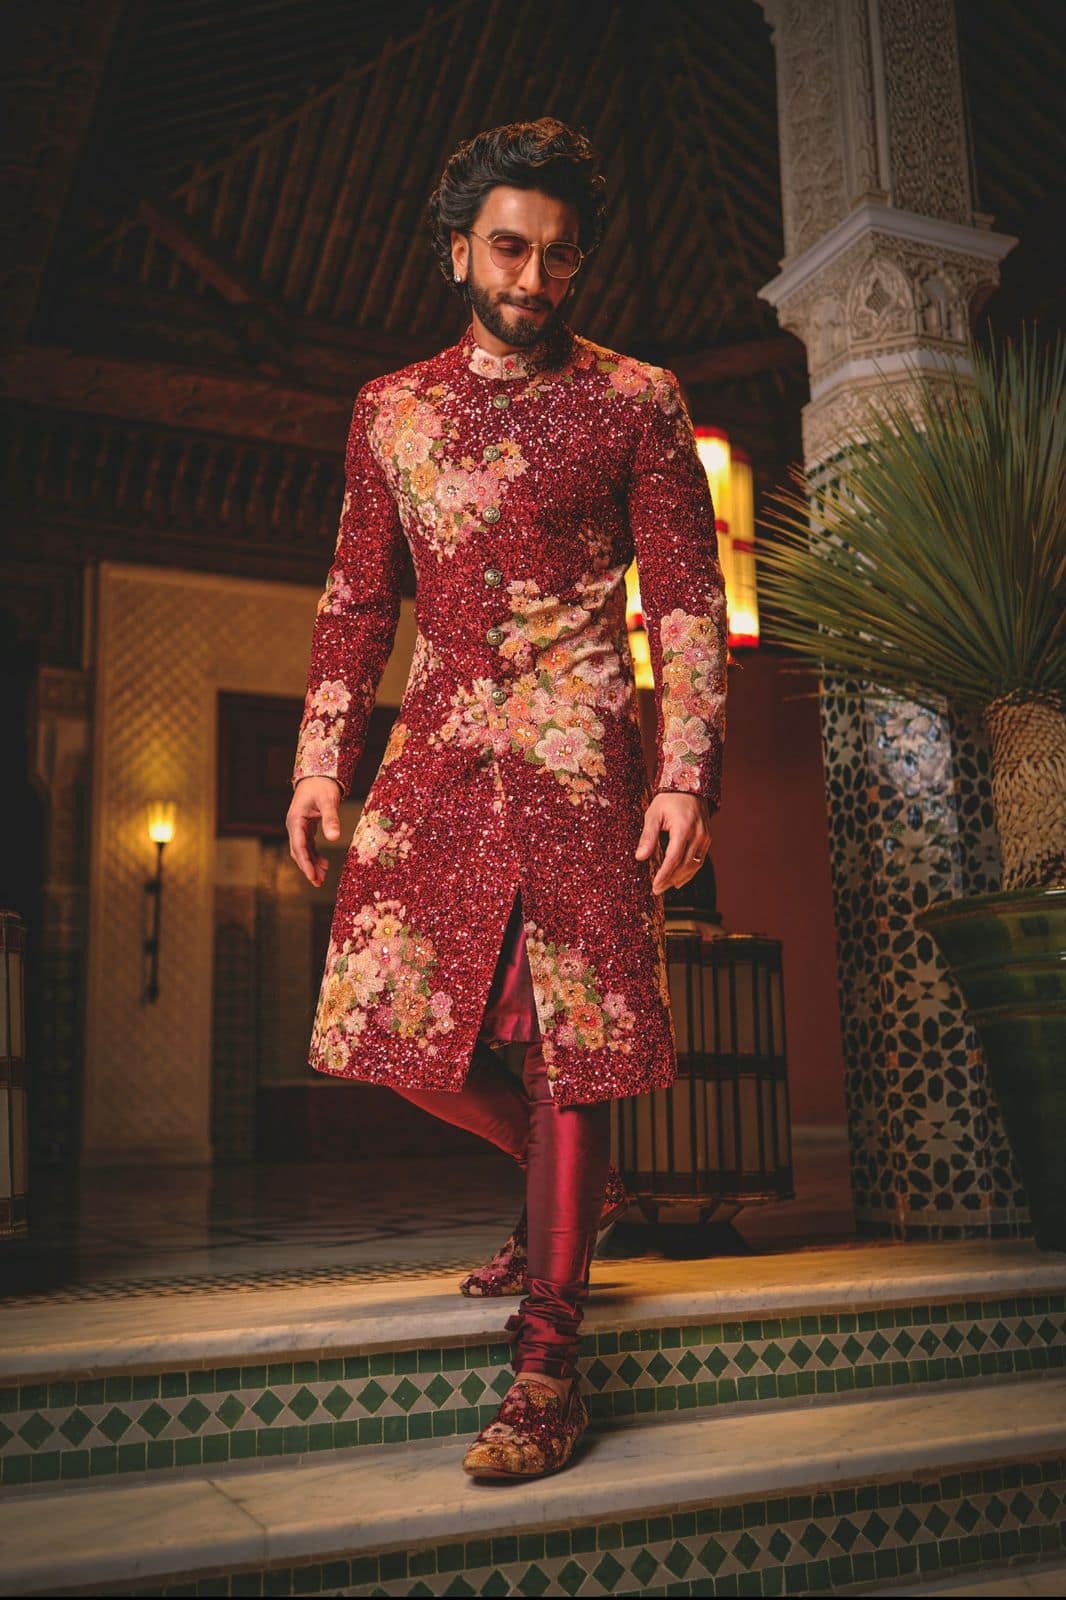 In dramatic silhouettes, chic designs, Ranveer Singh ups his fashion game  in Marrakech